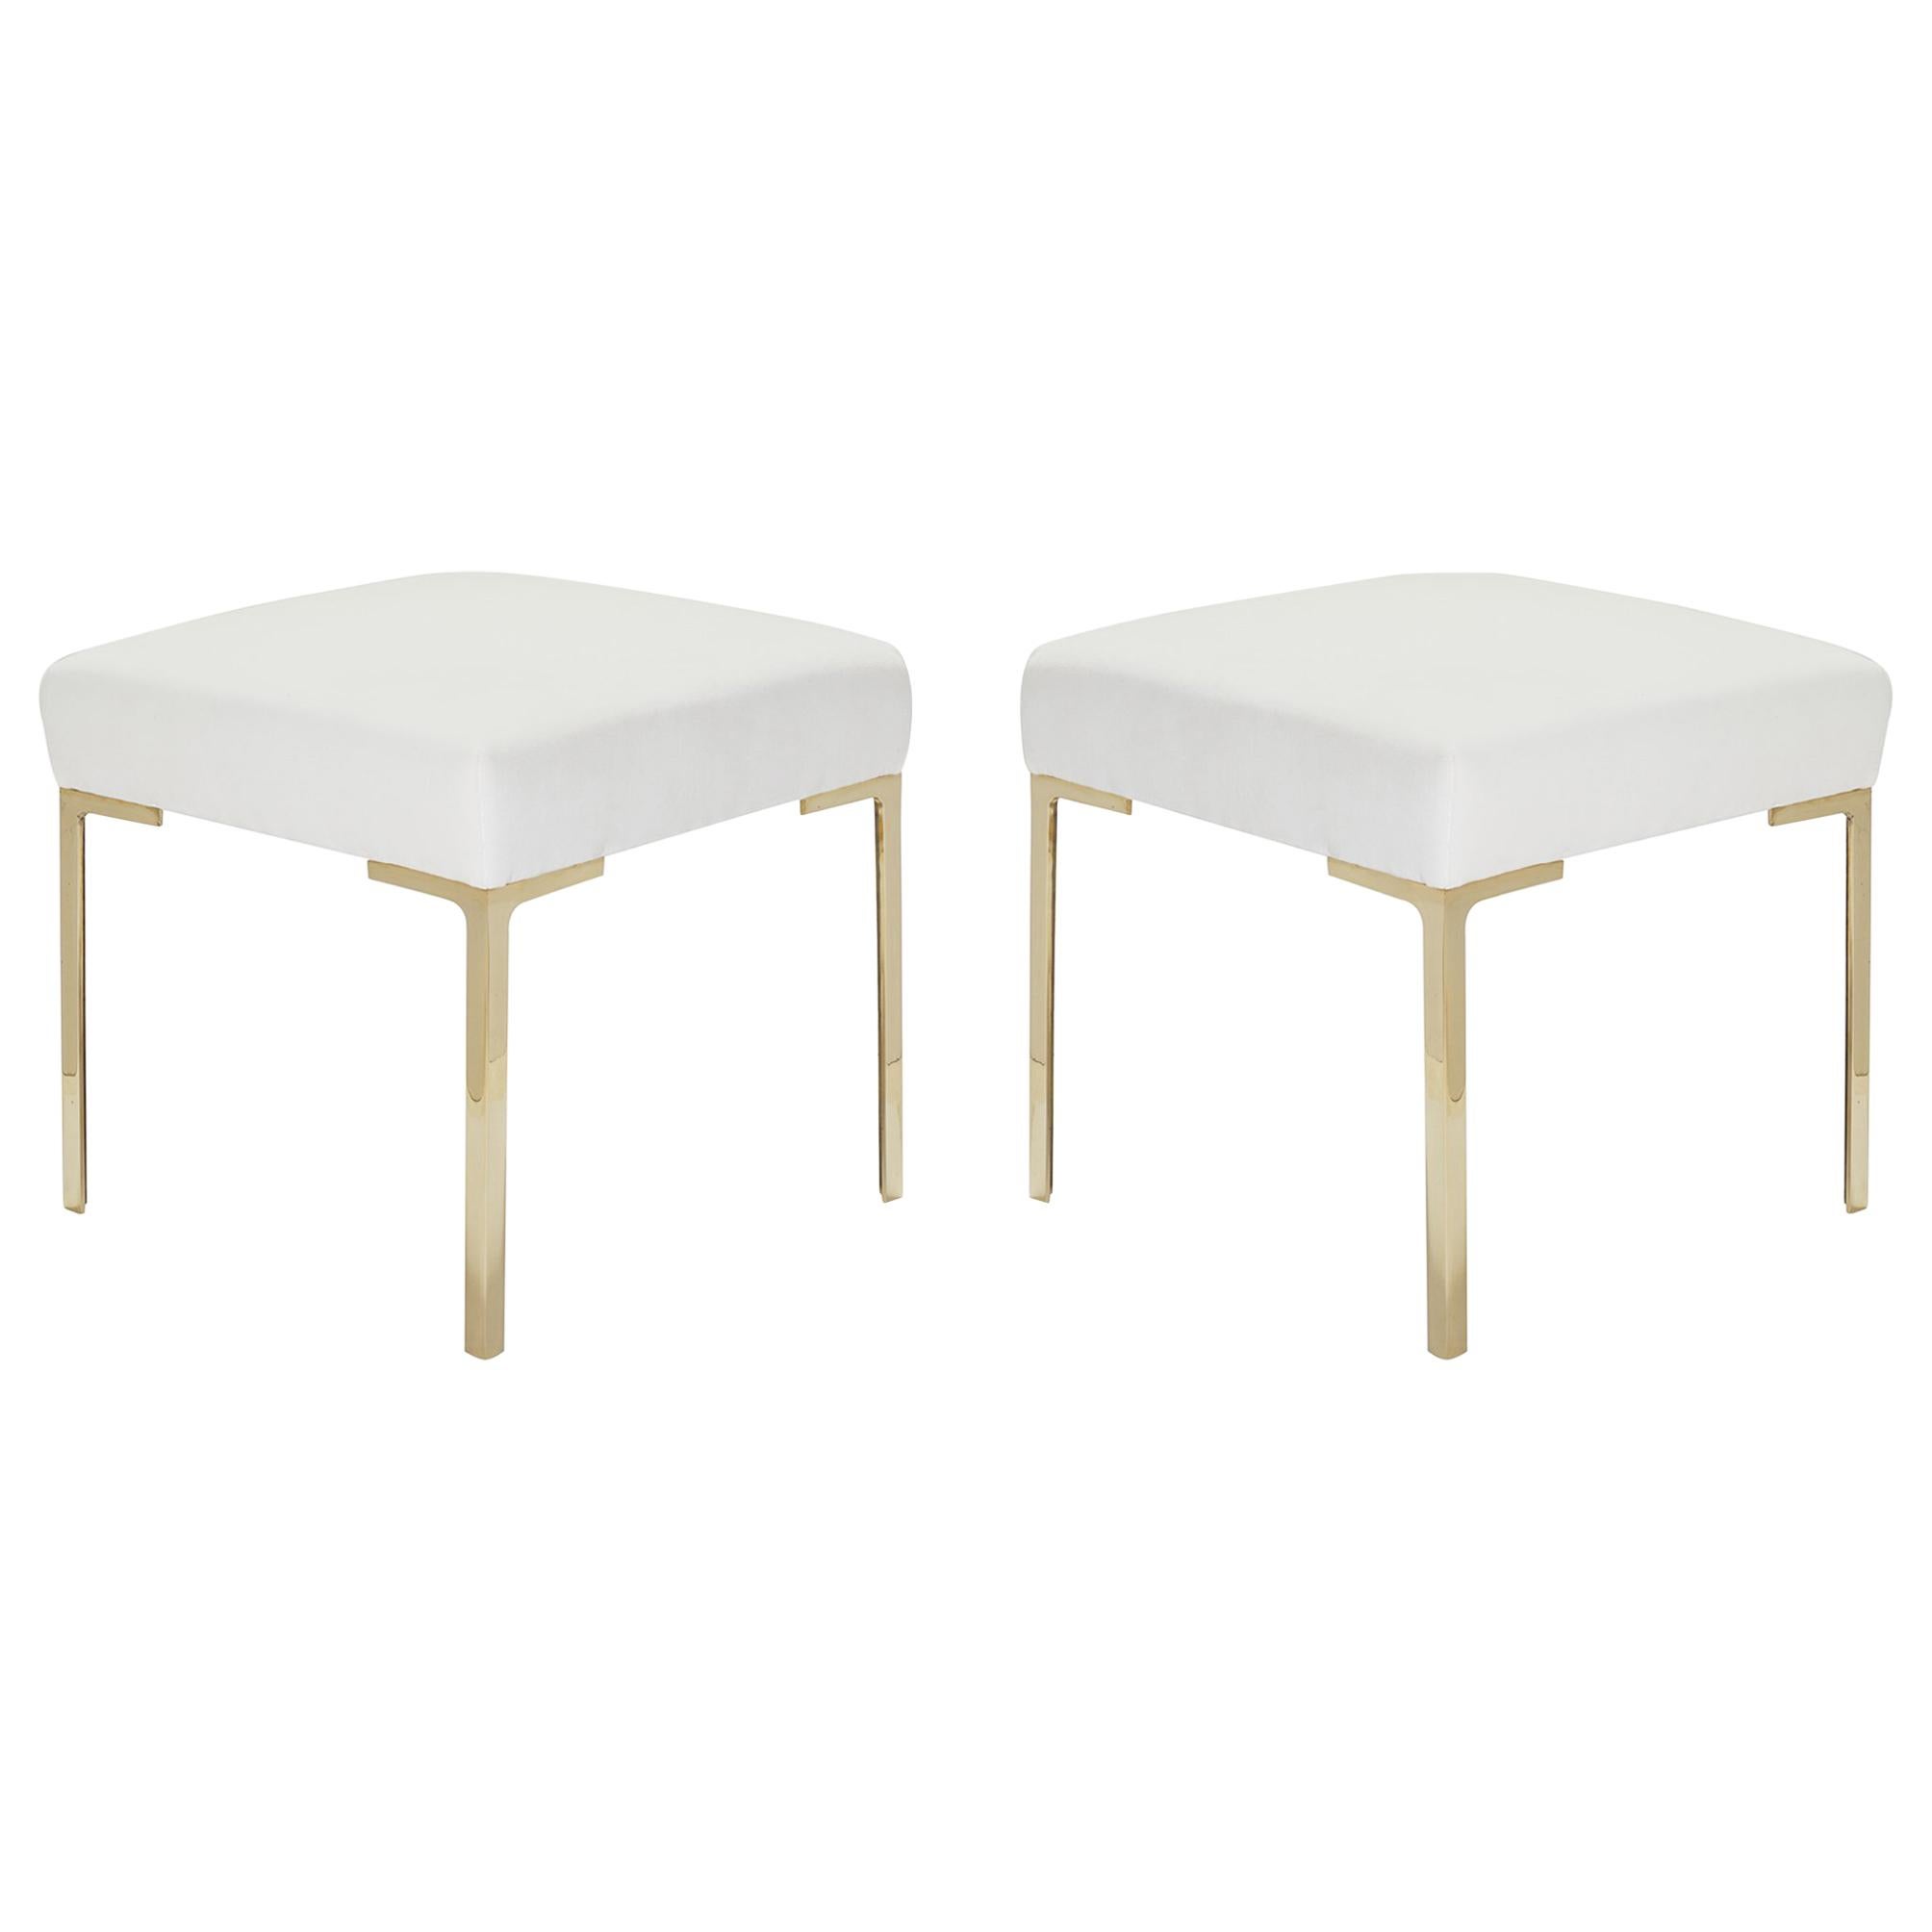 Astor Petite Brass Ottomans in Snow Velvet by Montage, Pair For Sale